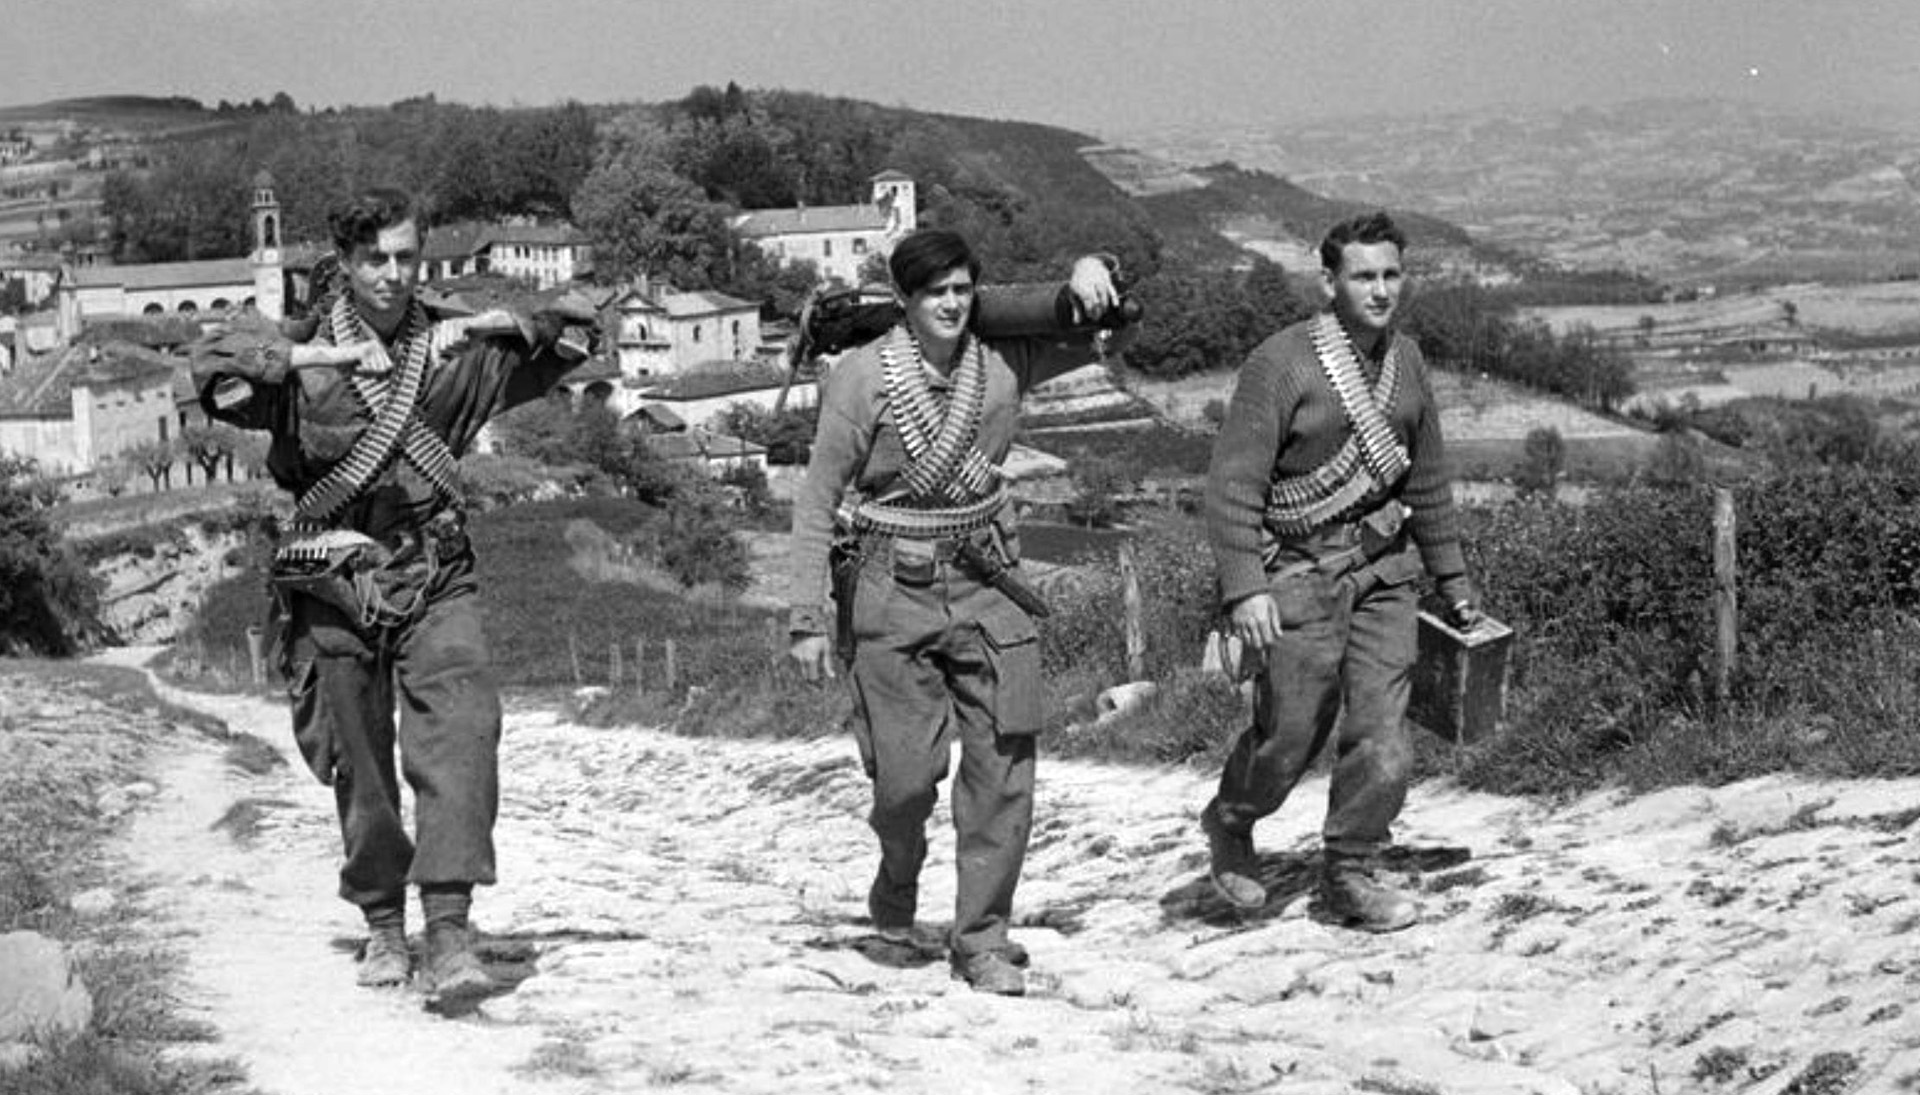 During an operation to assist Italian partisans, heavily armed men of No. 2 SAS Regiment carry components of Vickers machine guns and ammunition belts draped over their shoulders as they traverse a mountain path somewhere in the countryside of Italy.